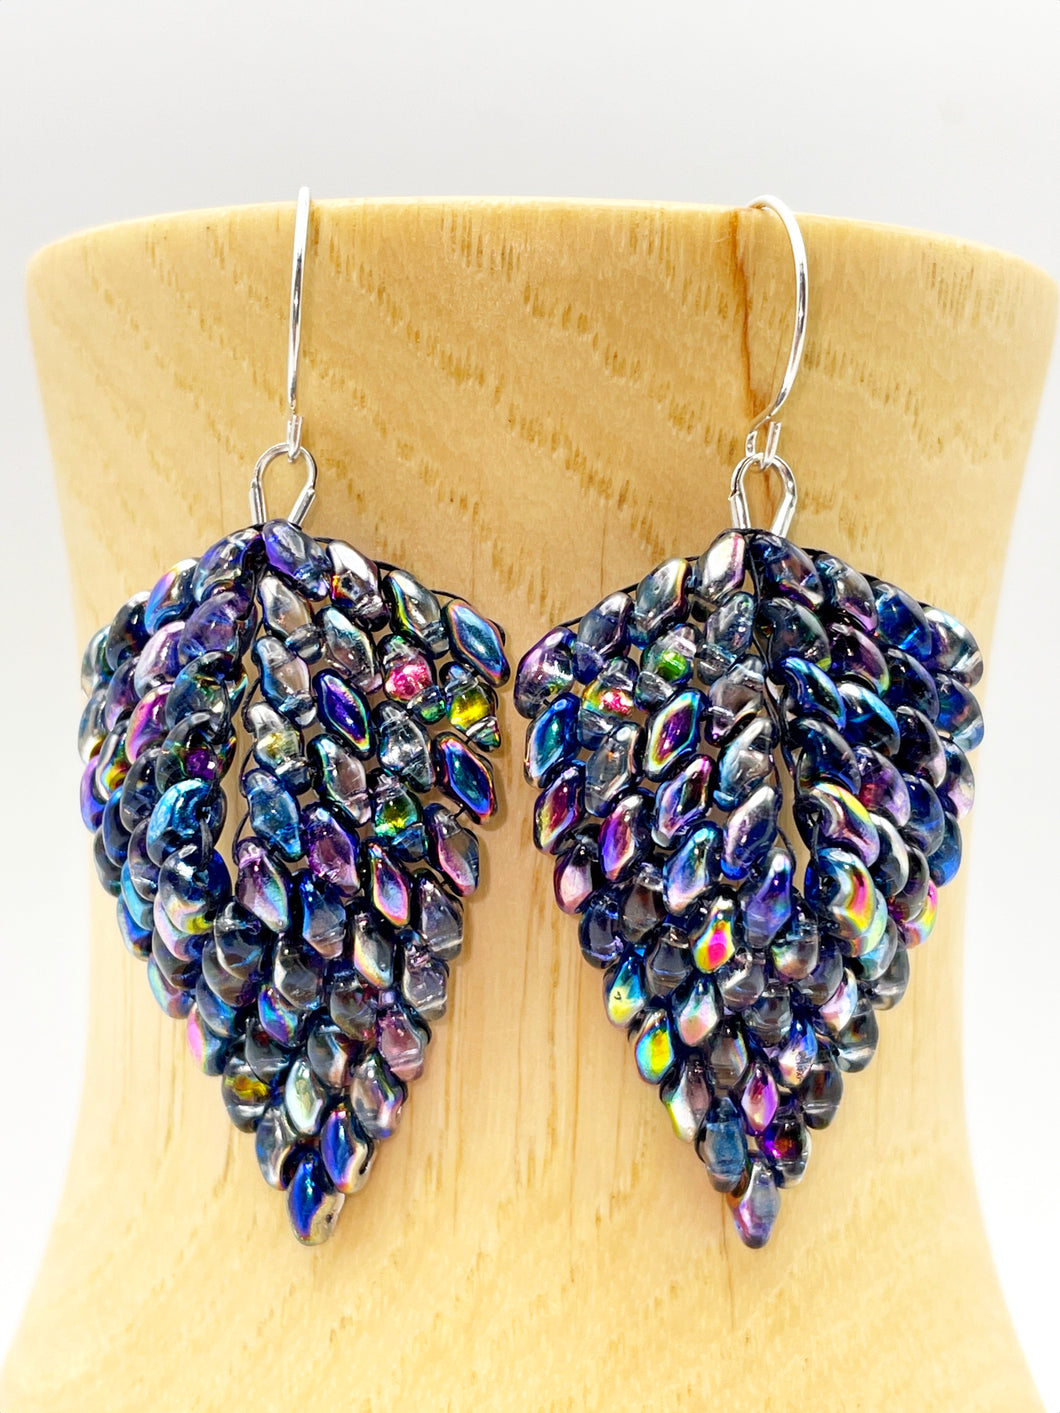 iridescent black beaded Russian leaf earrings.  Hand beaded and hung on sterling silver ear wires